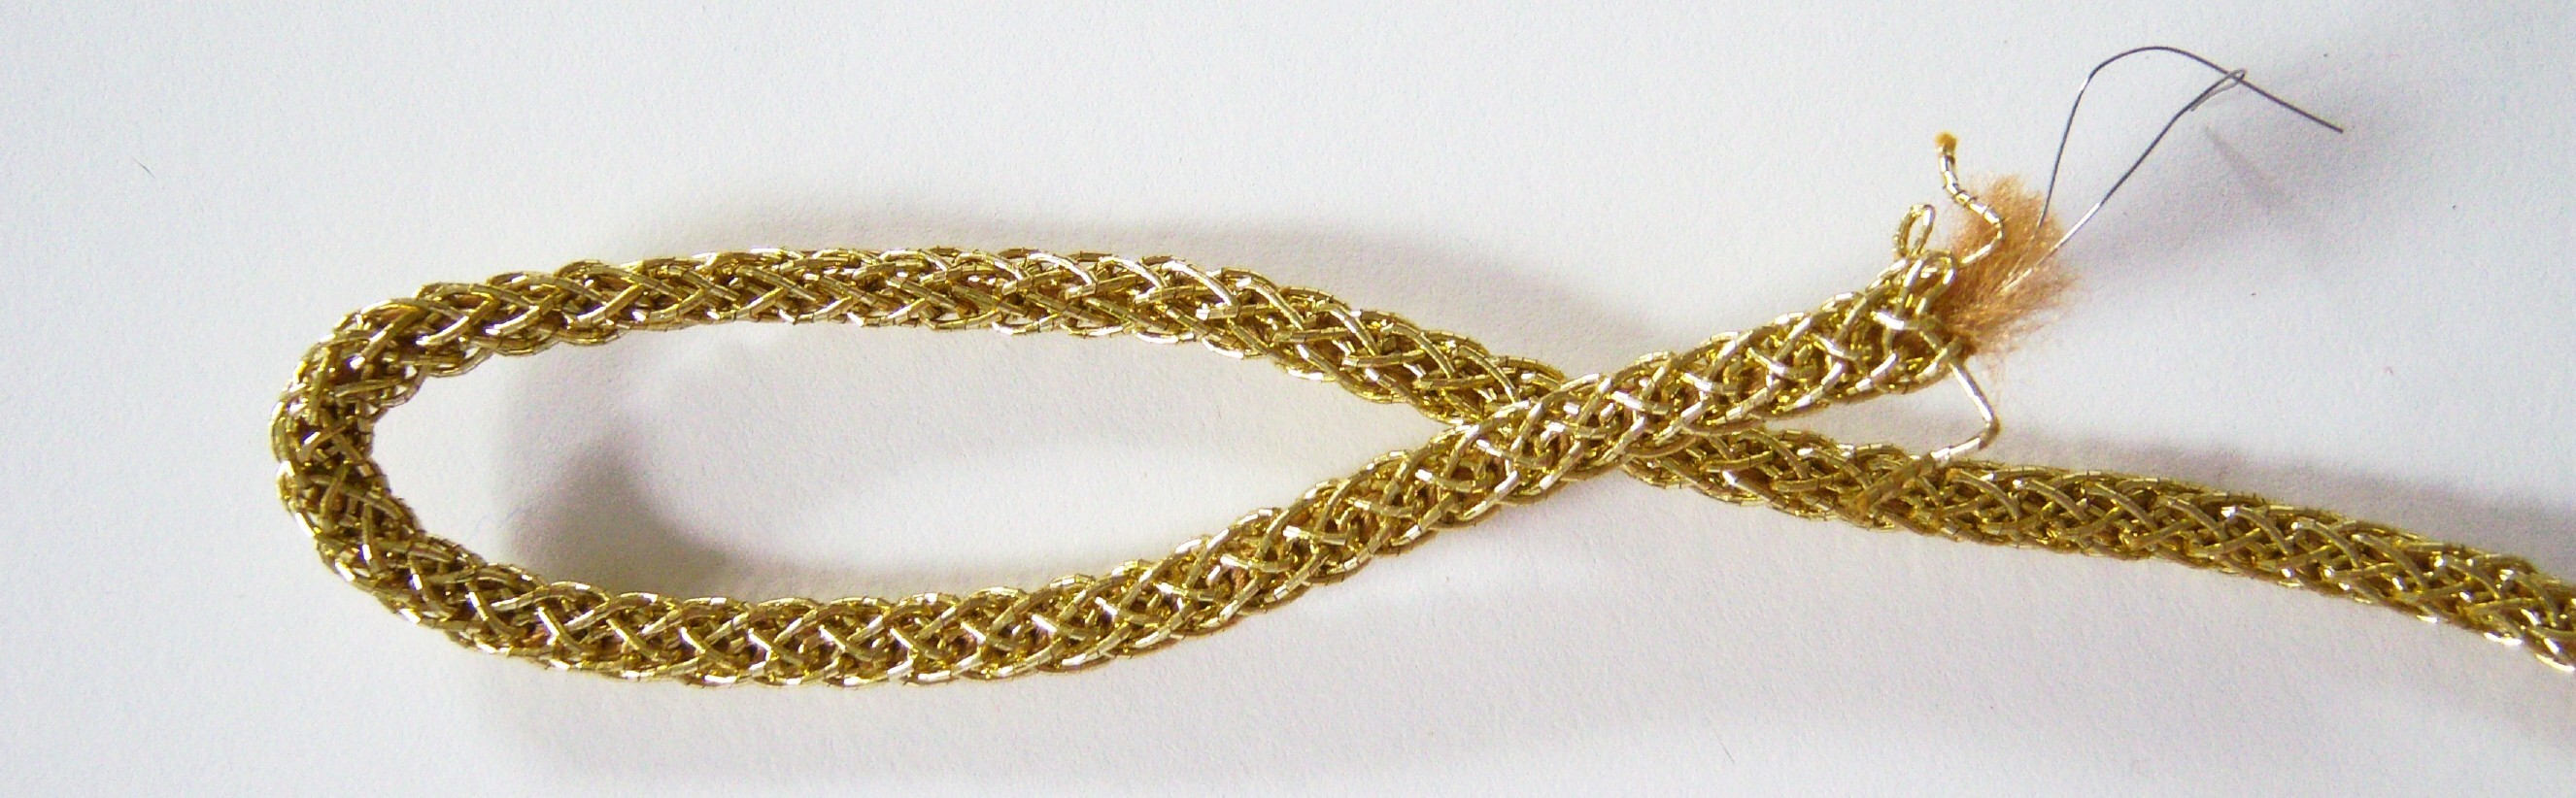 Gold Wired 1/4" Cord Sewing Trim